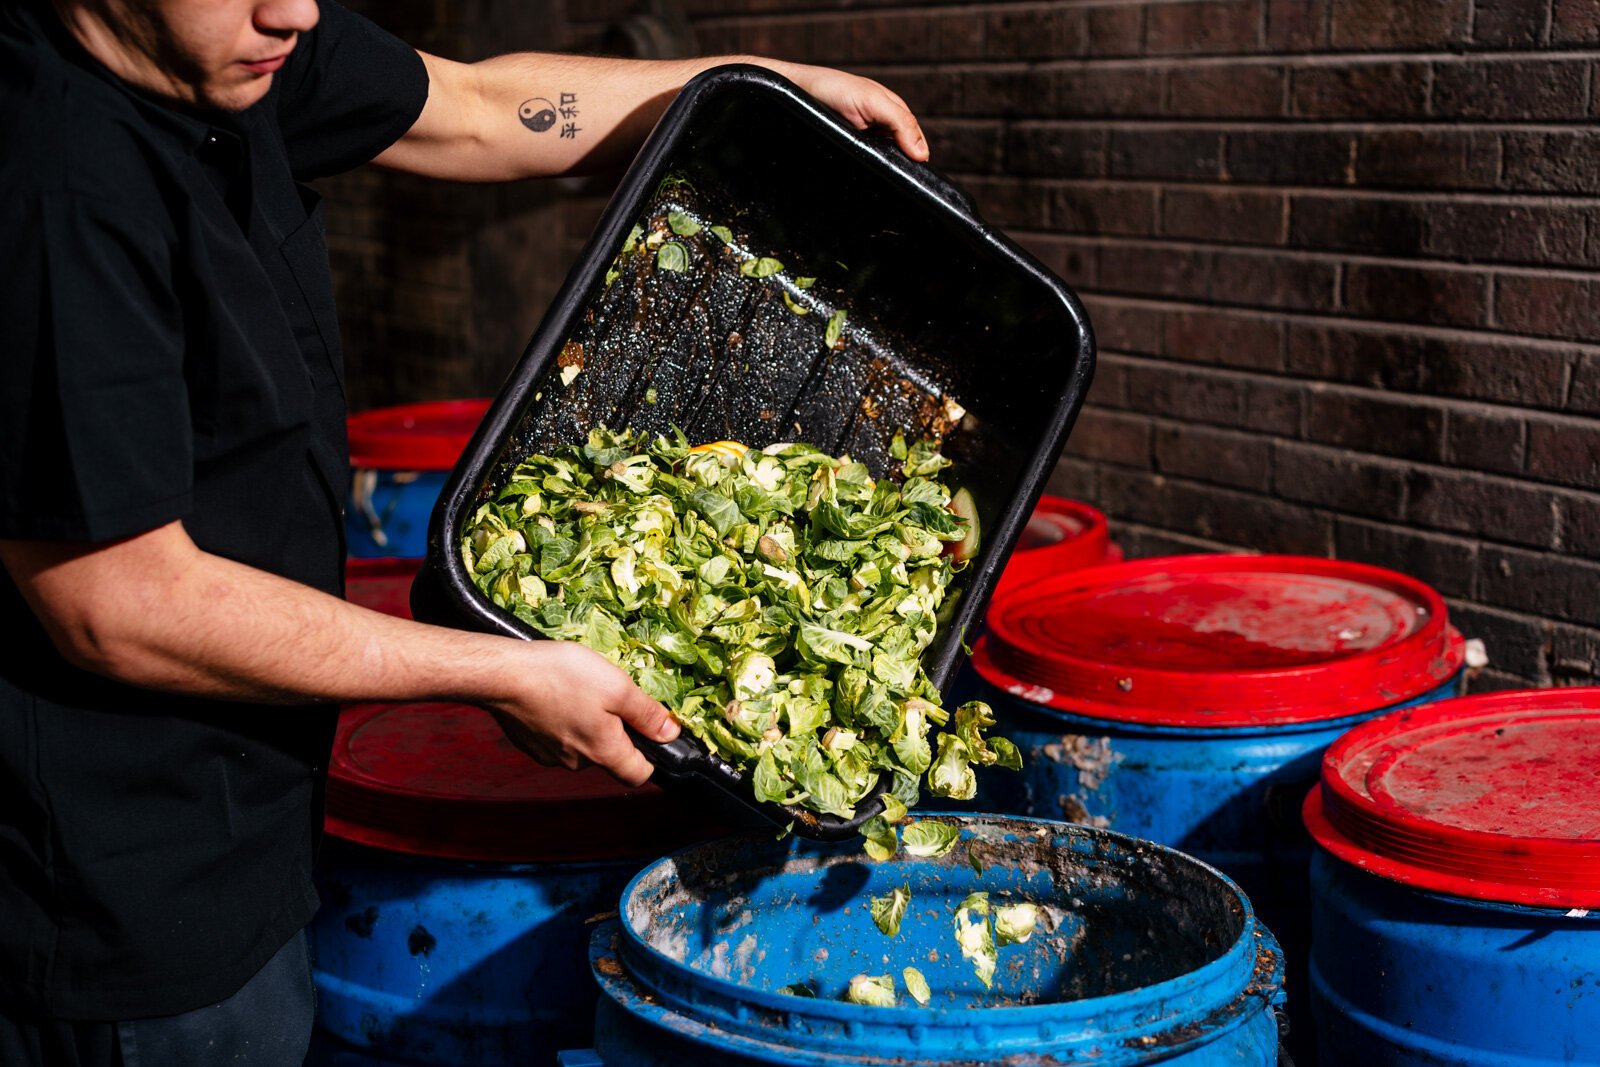 A staff member pours unused brussel sprout leaves into a compost barrel at the Apparatus Room.